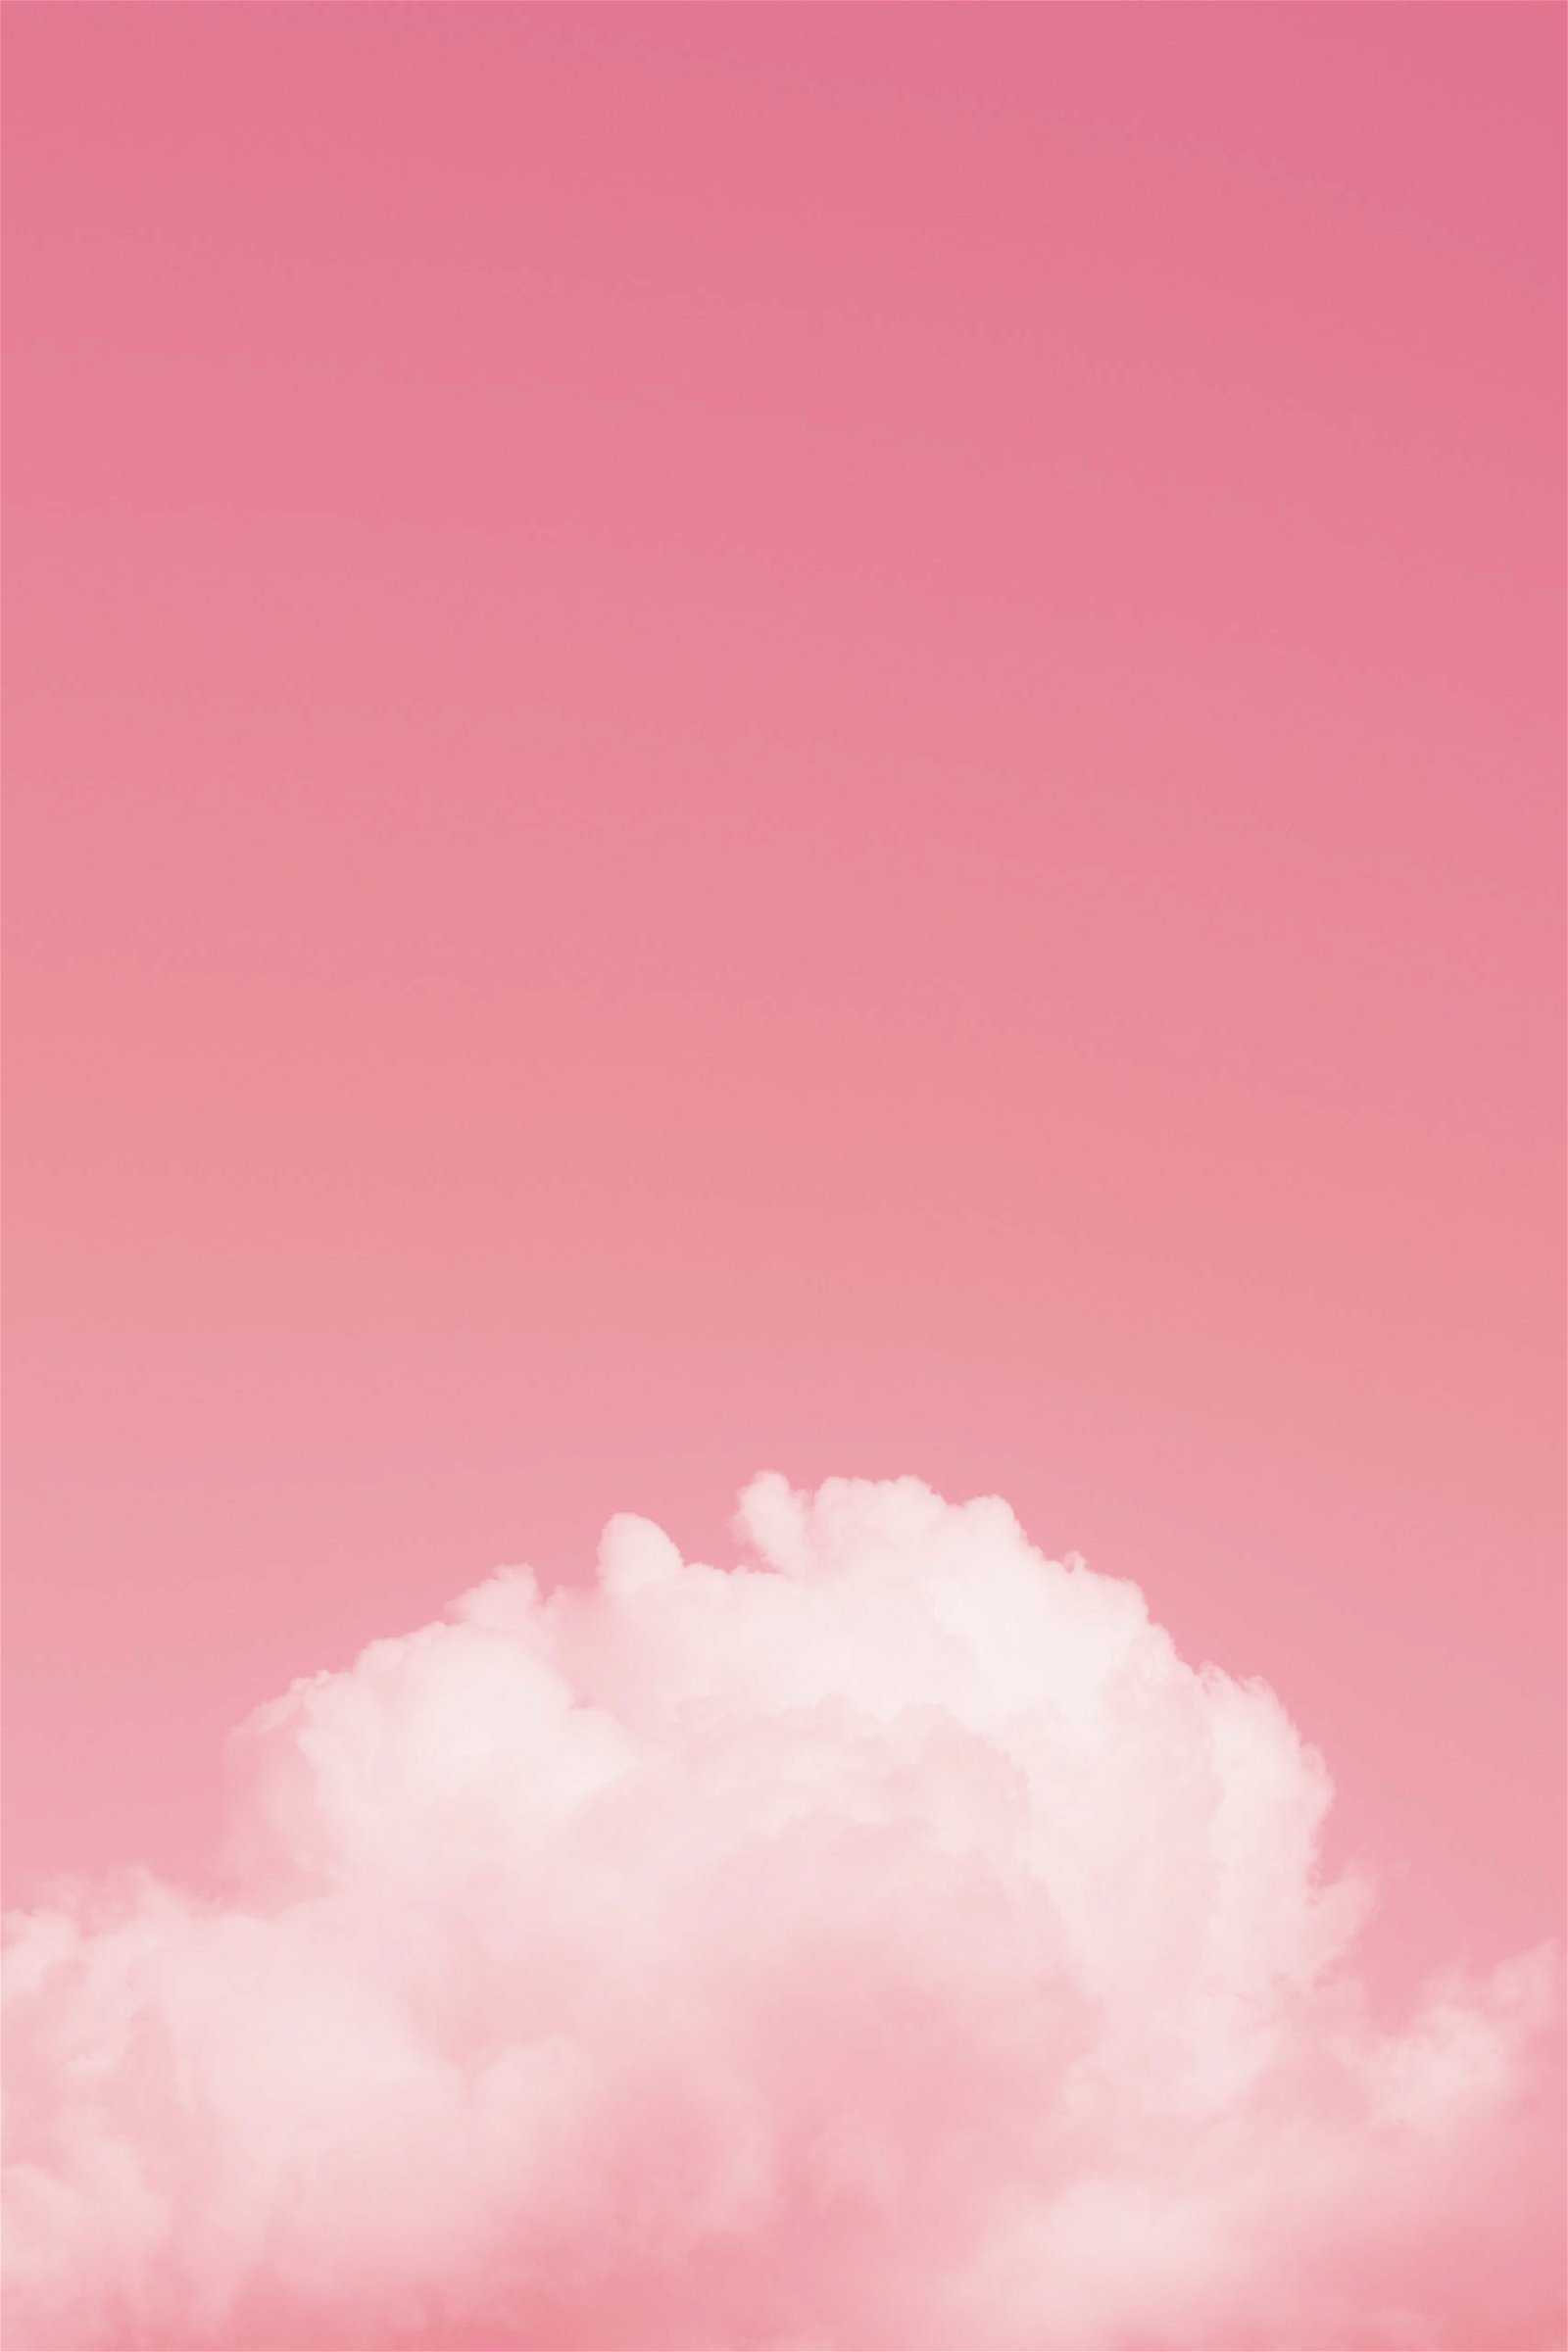 A pink sky with a white cloud - Cloud